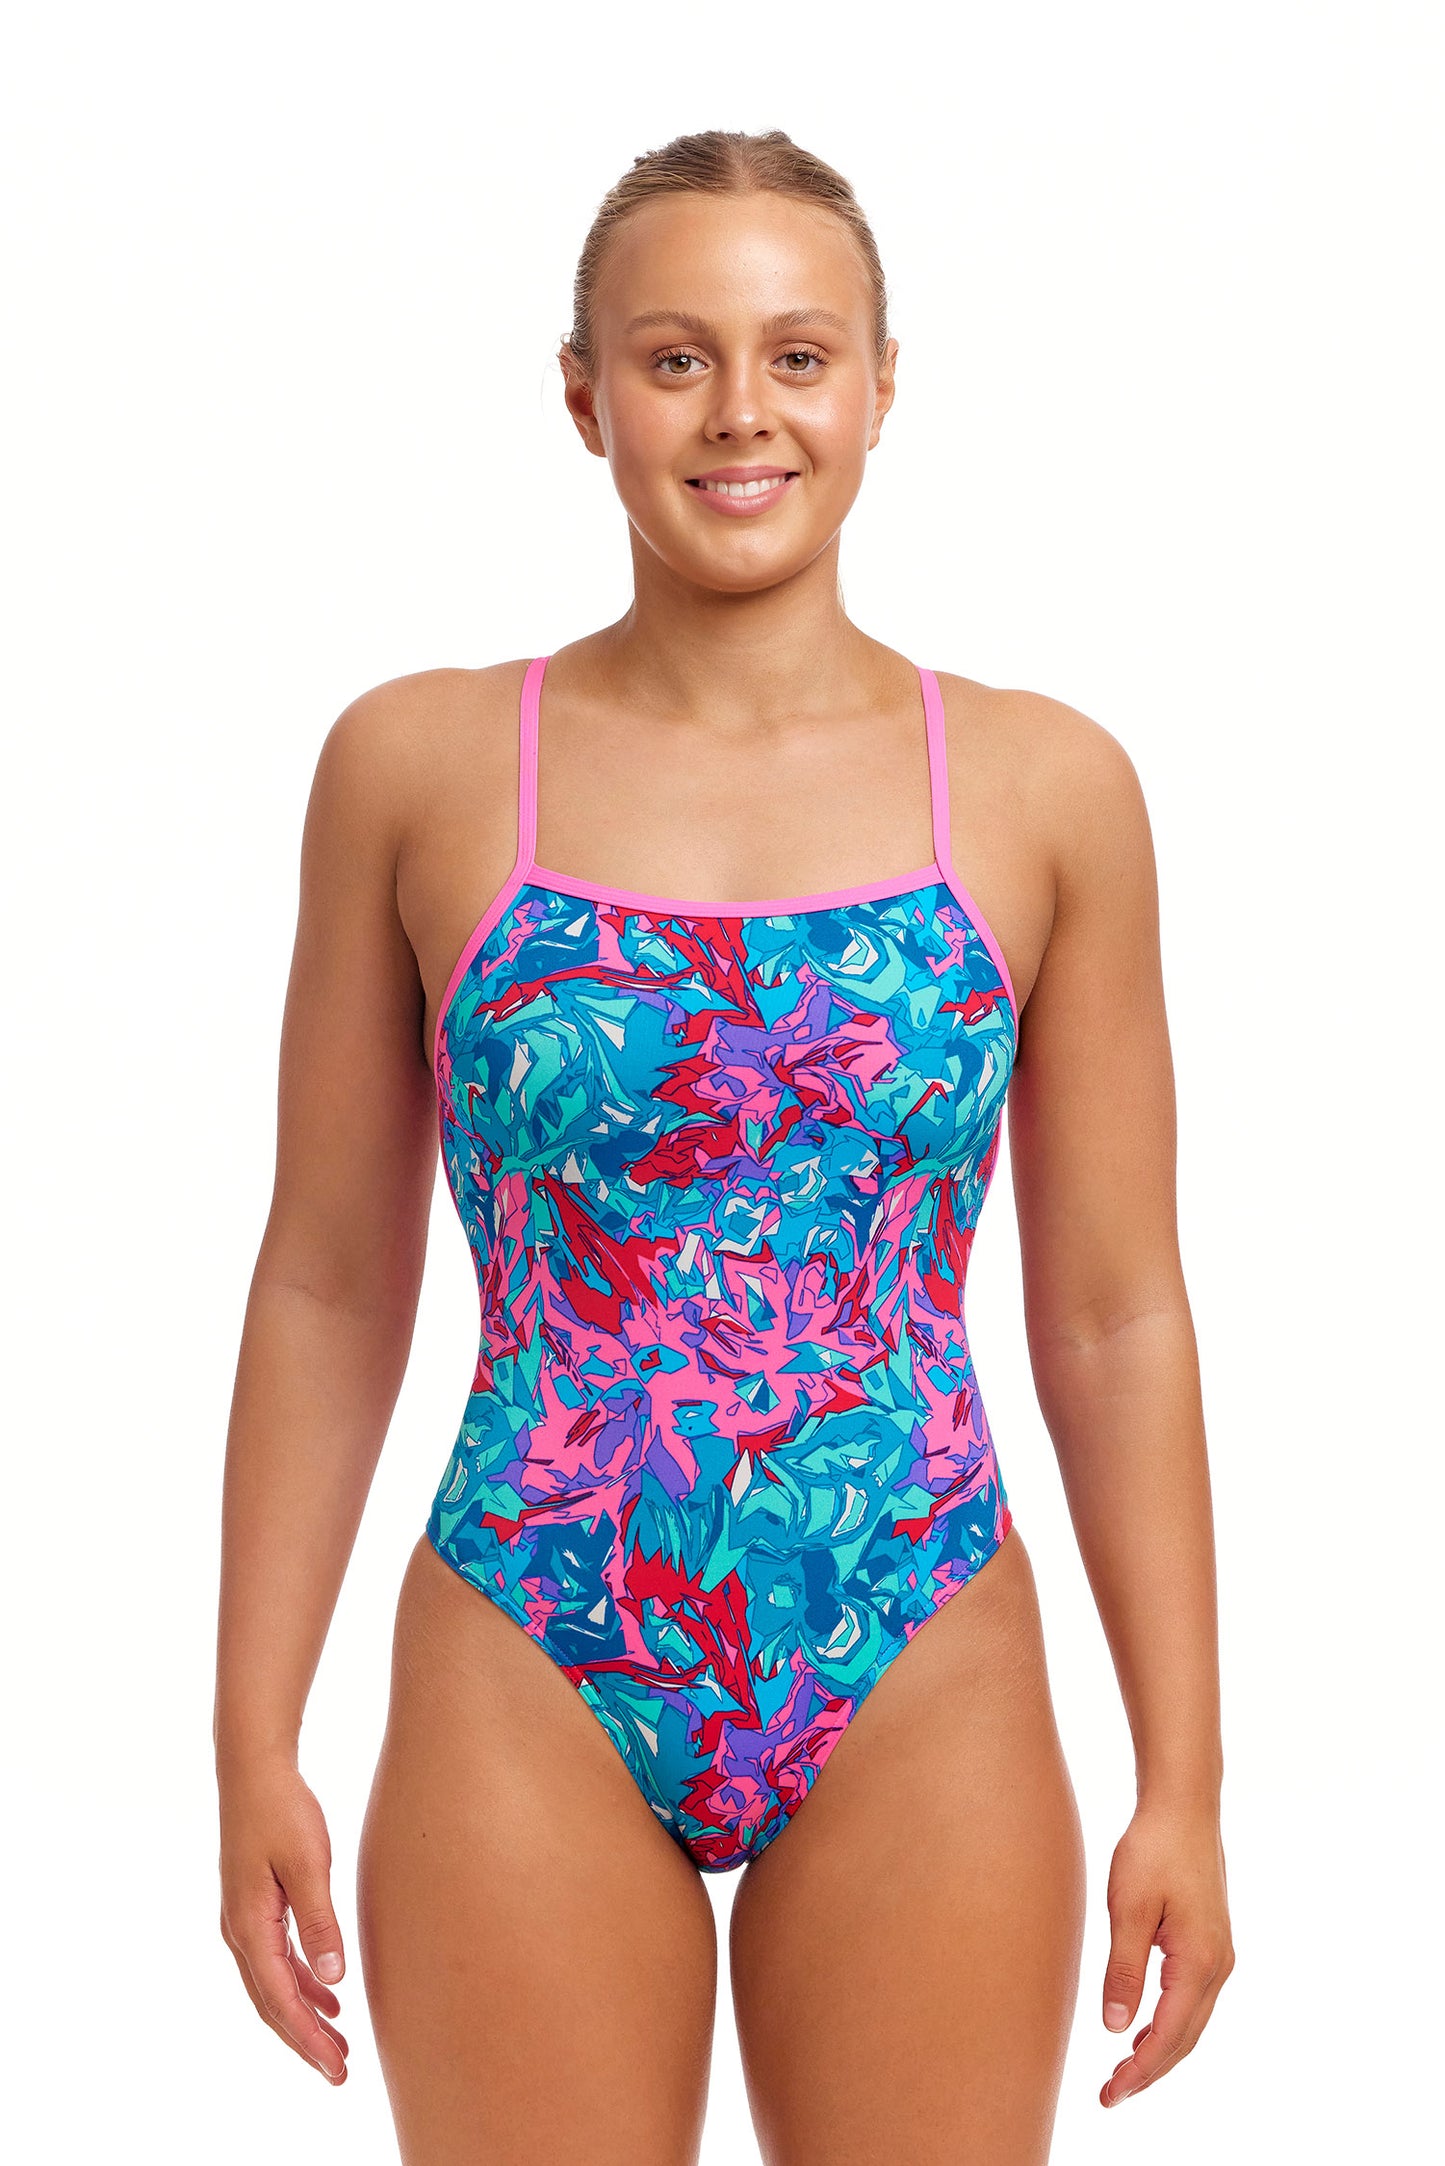 NEW! Funkita Ladies Eco Strapped In One Piece Manga Mad